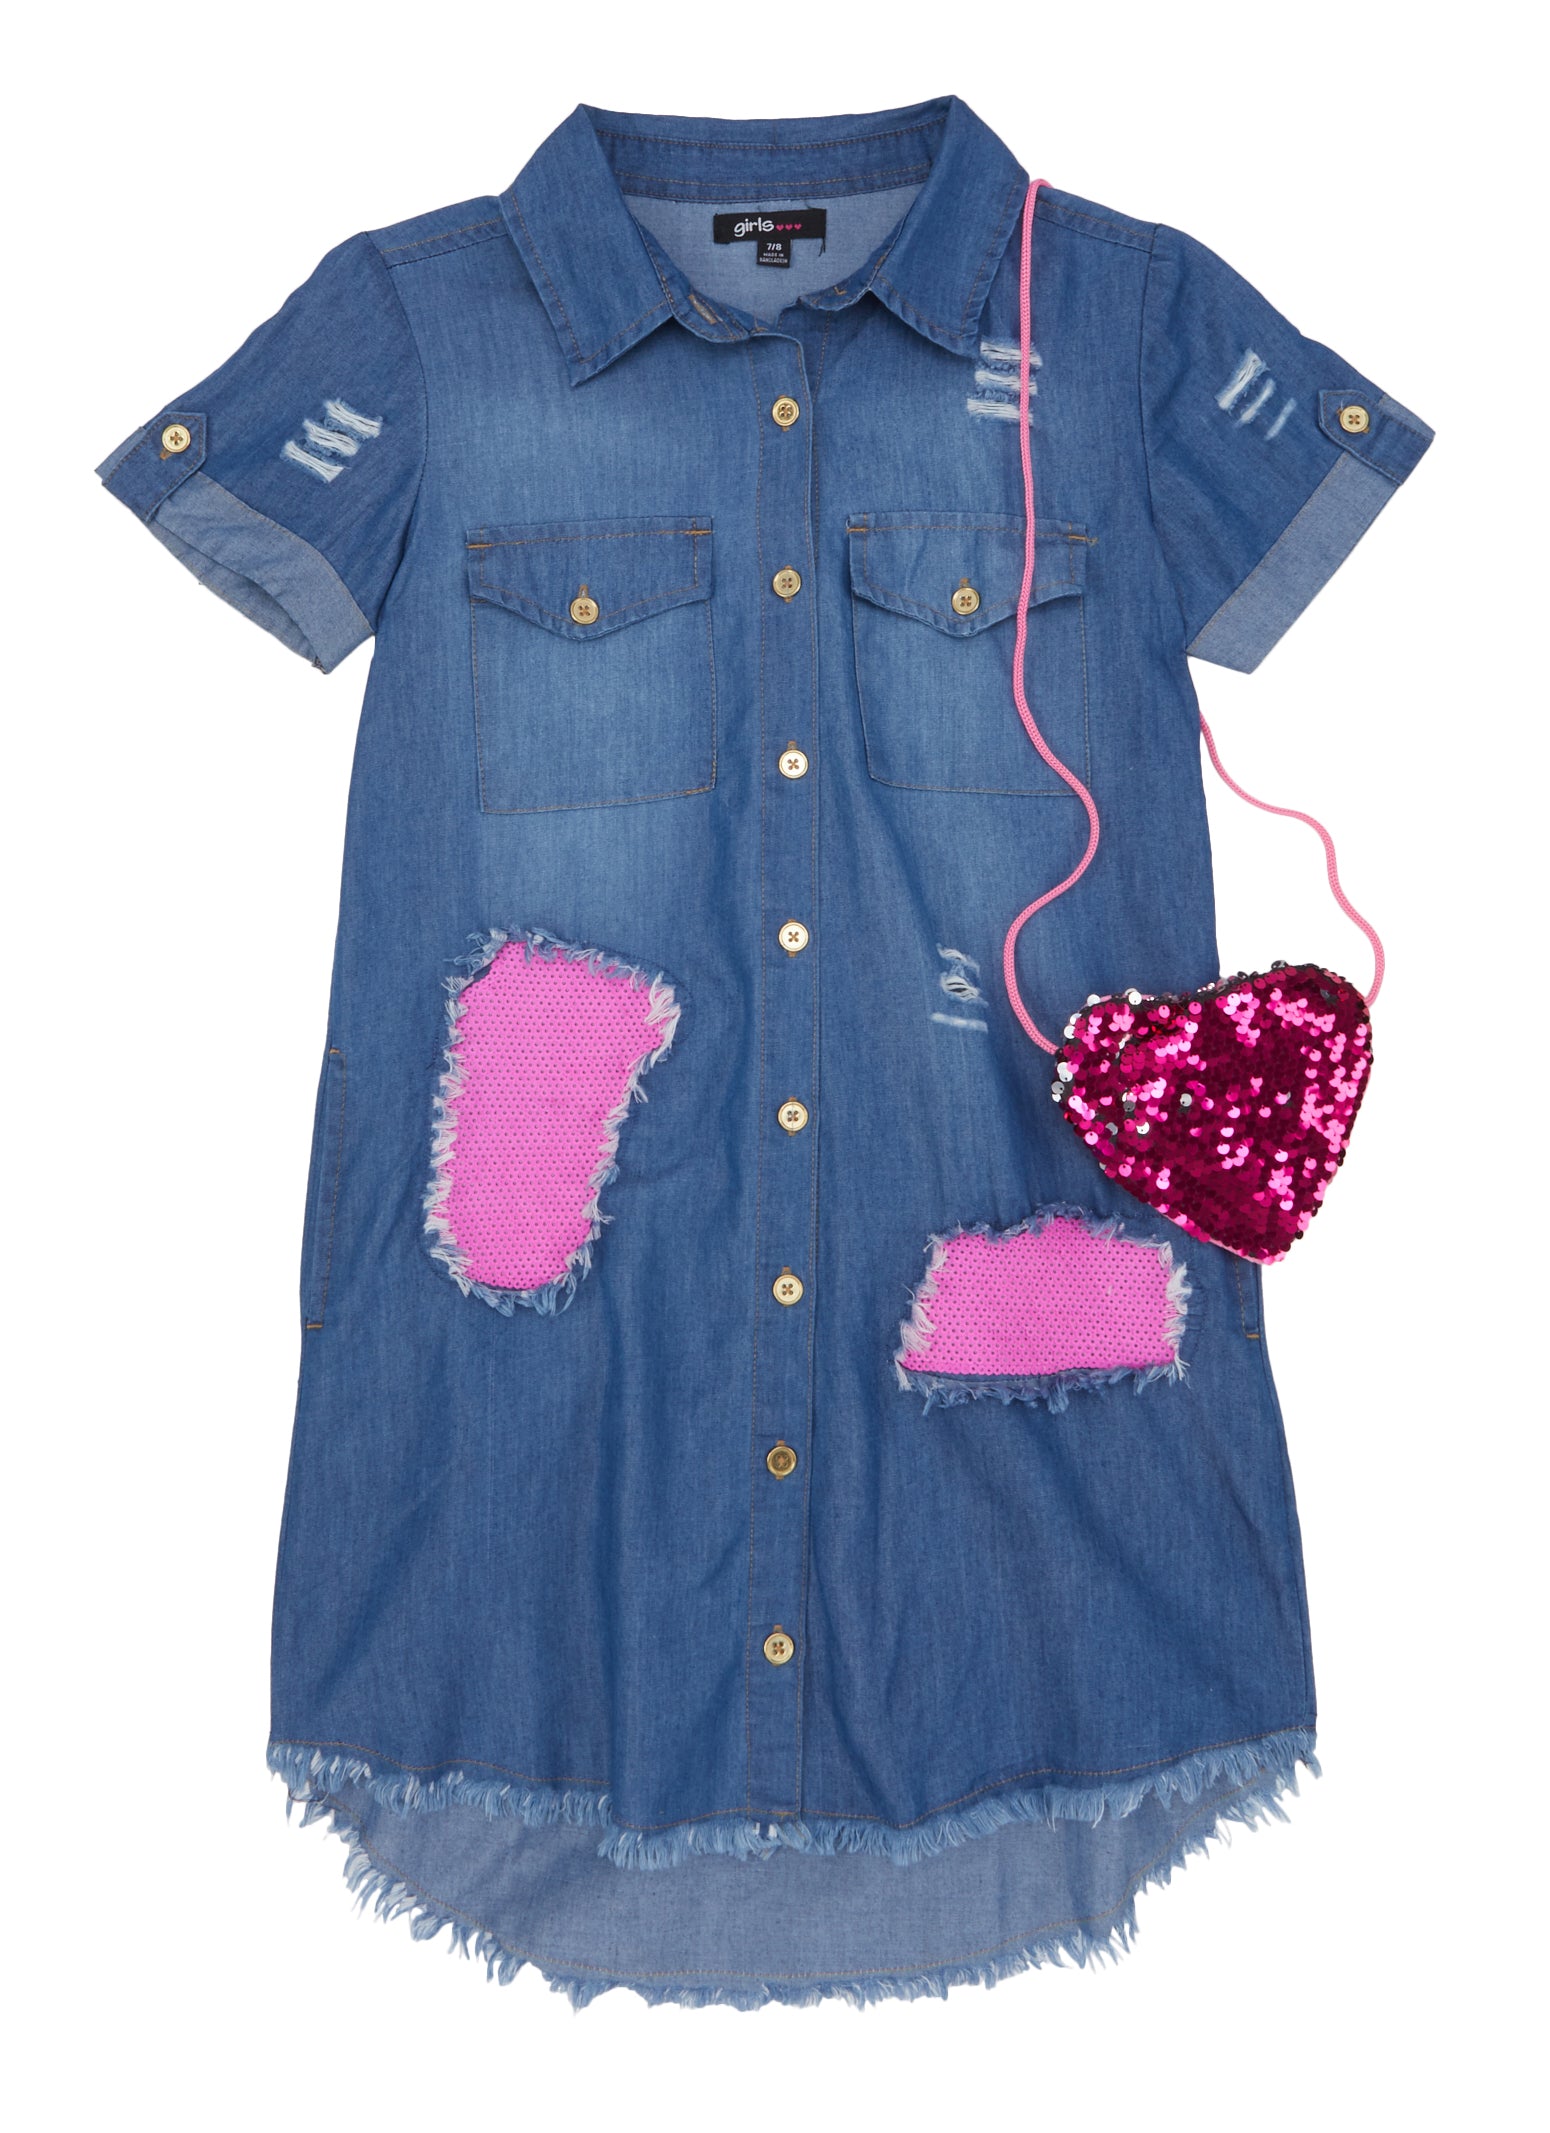 Kids Denim Vest Vacation Costume Outfit Tops Sleeveless Clothes Turn-Down  Jean | eBay